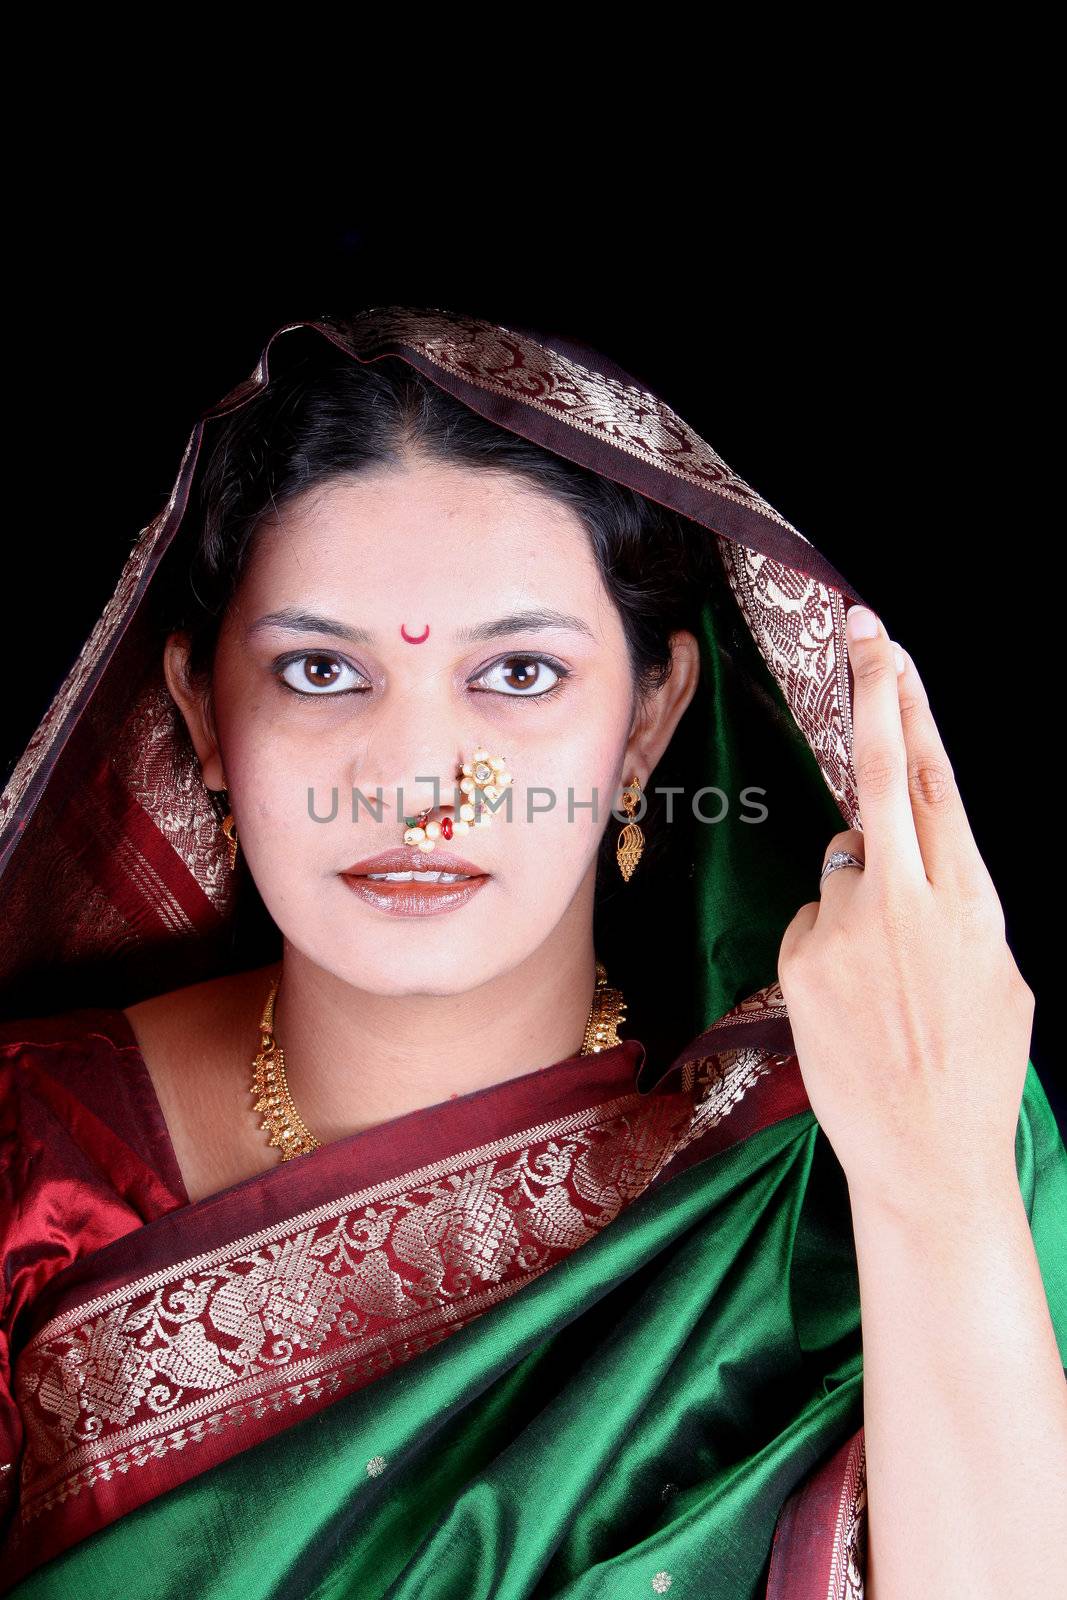 A portrait of a beautiful Marathi Indian woman in a traditional attire.